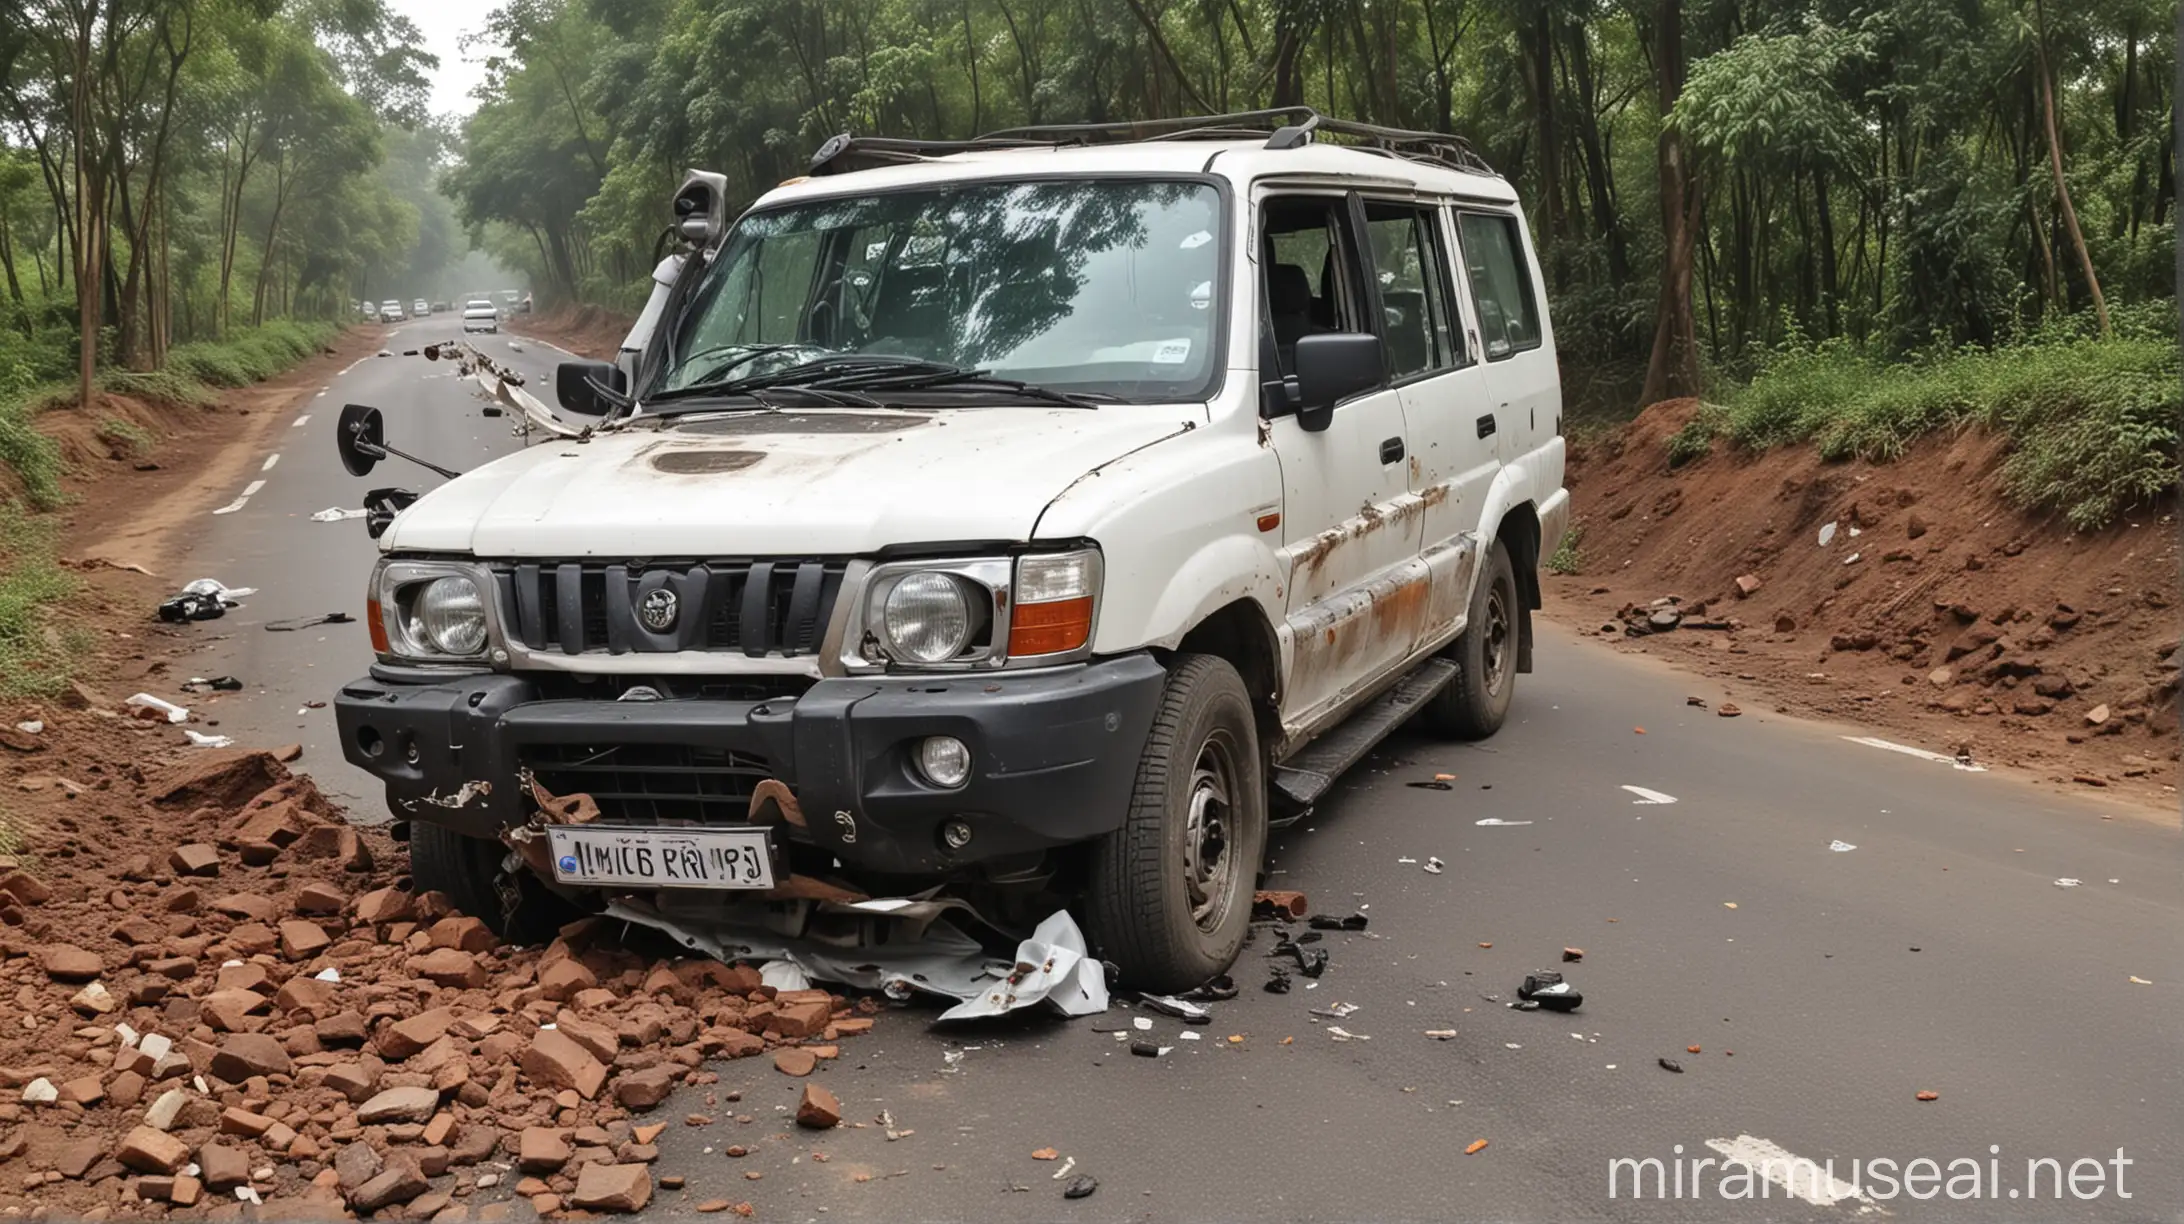 road accident, Truck hits Mahindra Scorpio on indian road